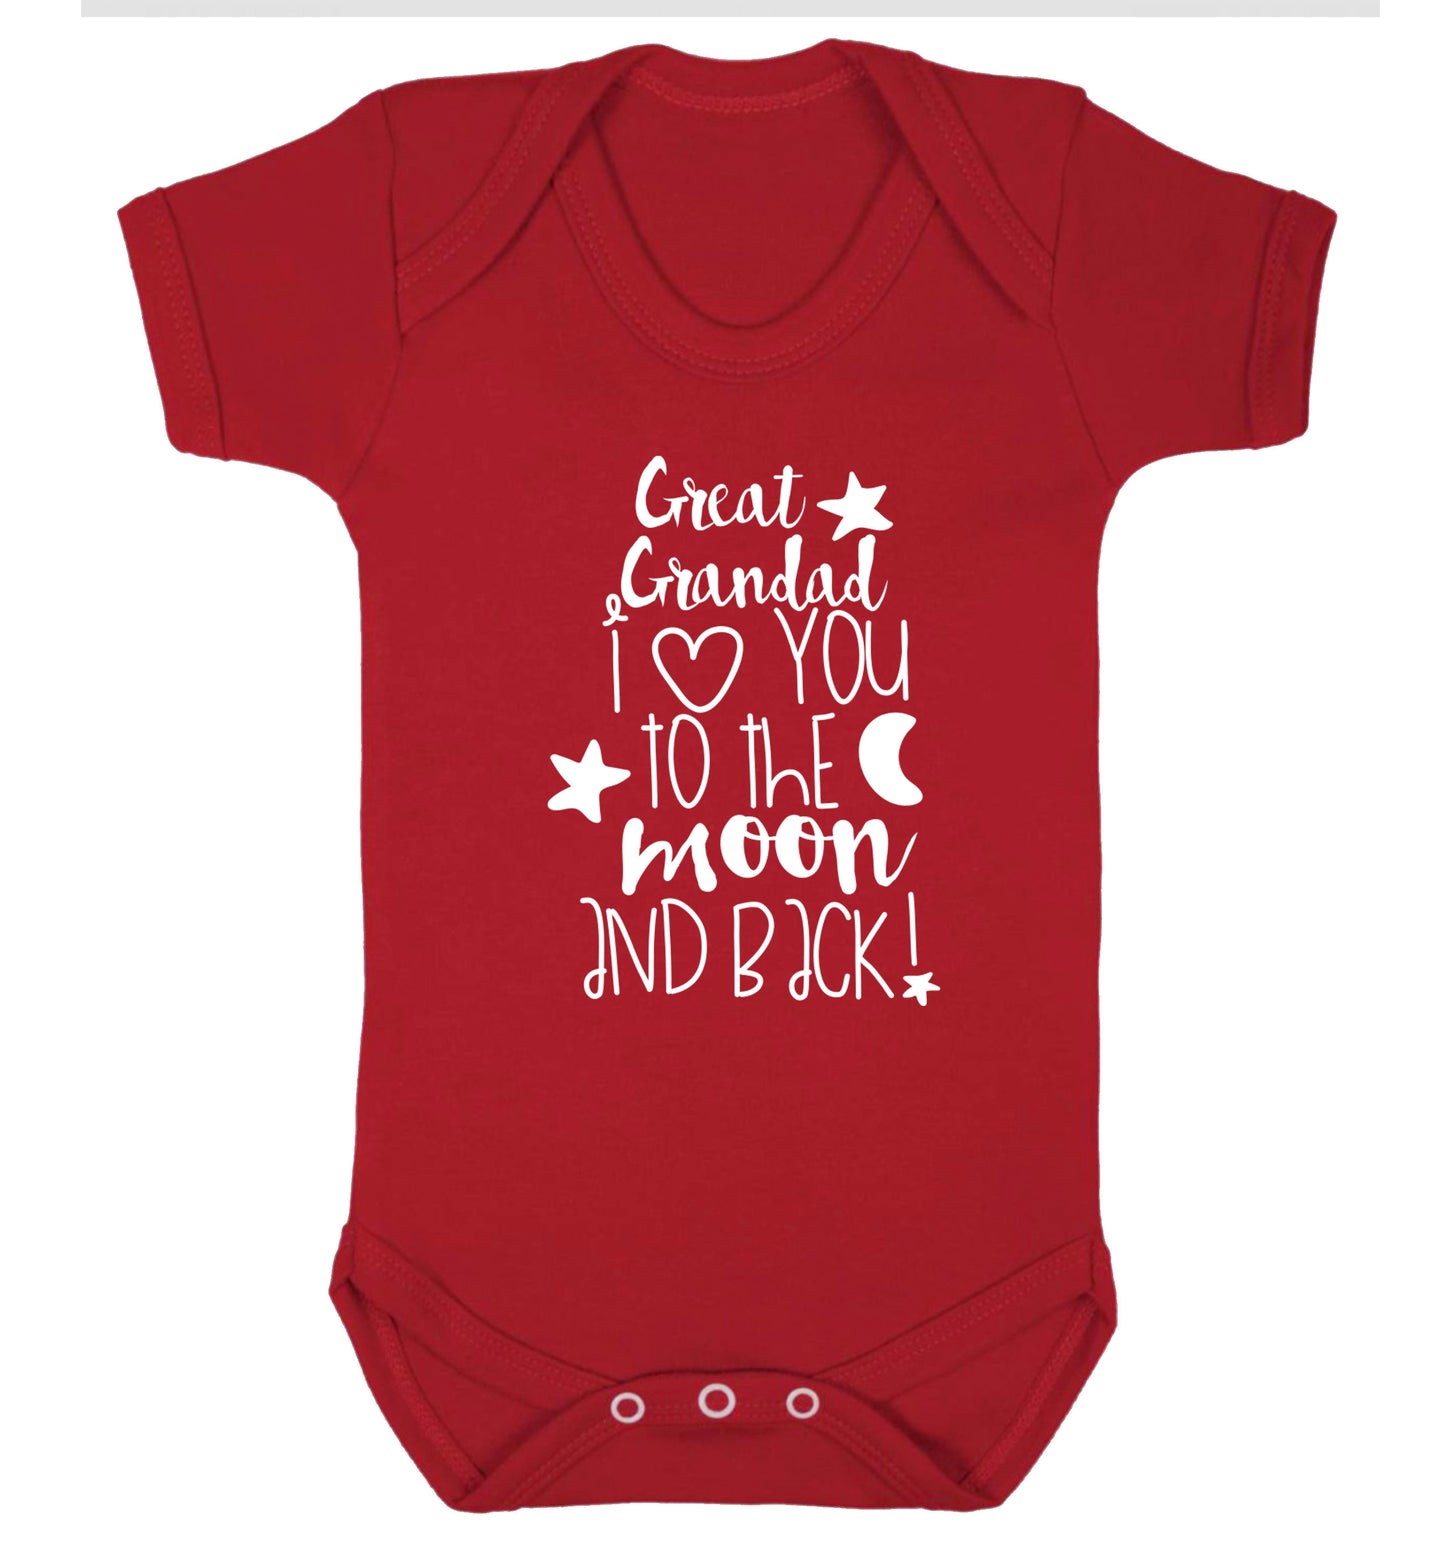 Great Grandad I love you to the moon and back Baby Vest red 18-24 months